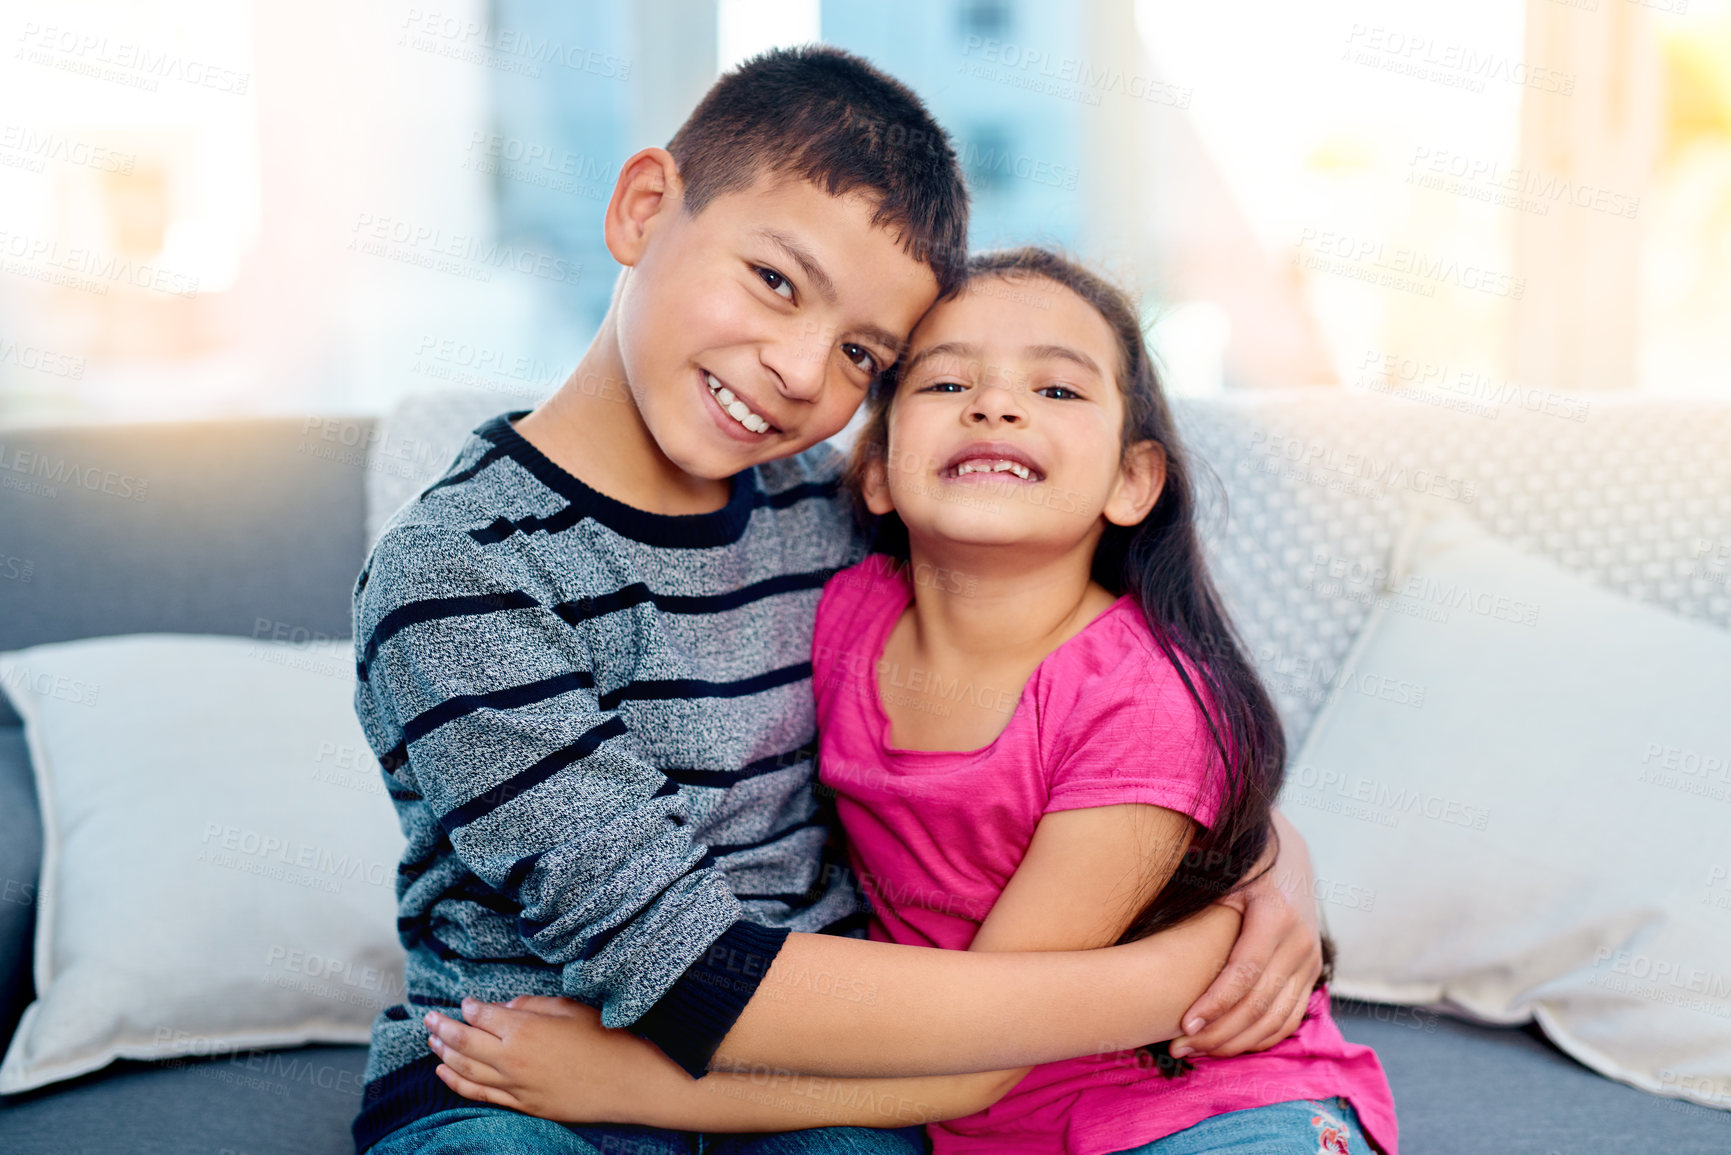 Buy stock photo Portrait of two adorable young children posing with their arms around each other while relaxing on a sofa at home